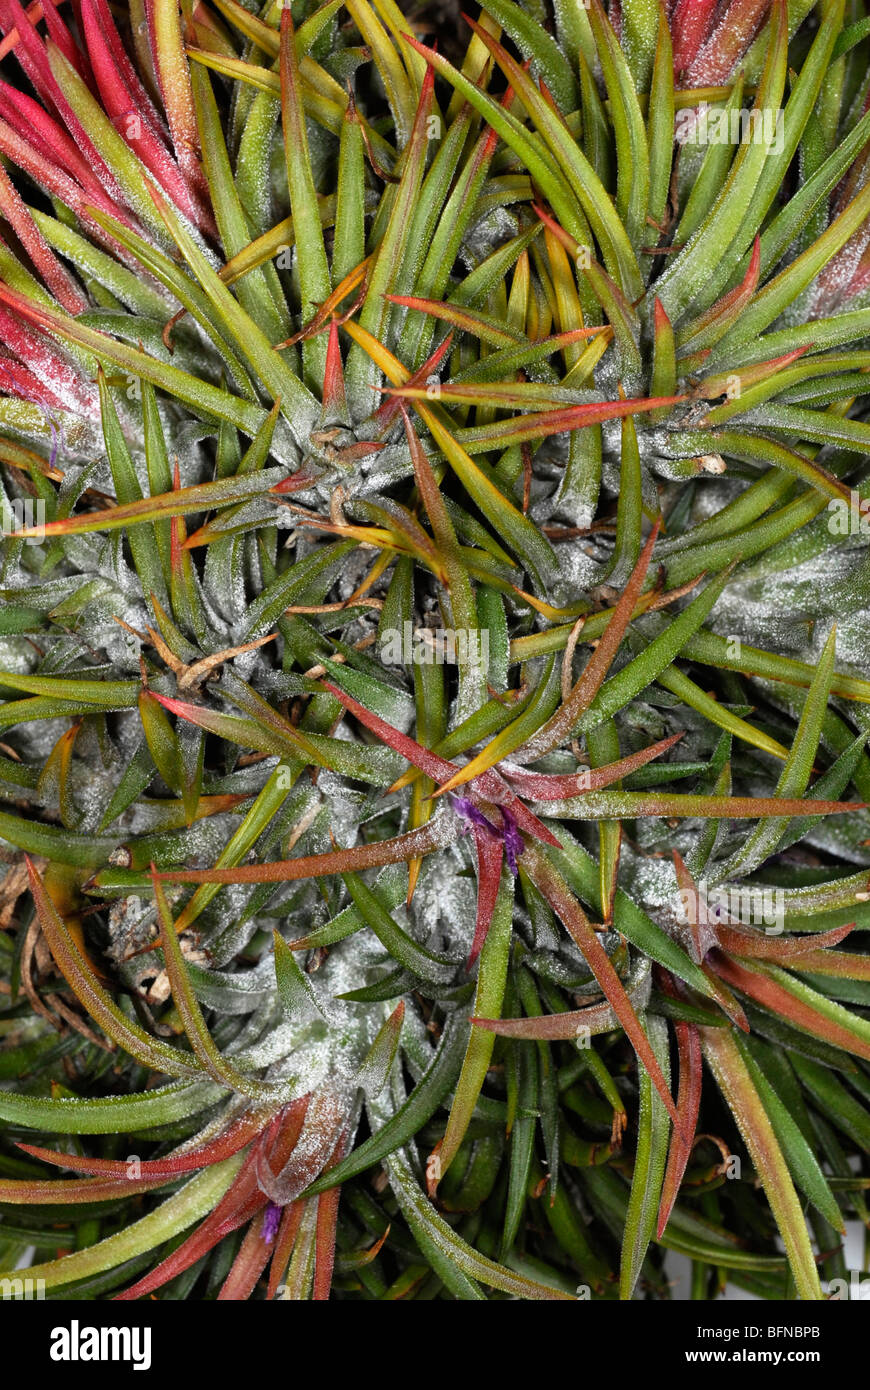 Tillandsia ionantha, a flowering plant in the family Bromeliaceae (the bromeliads) Stock Photo